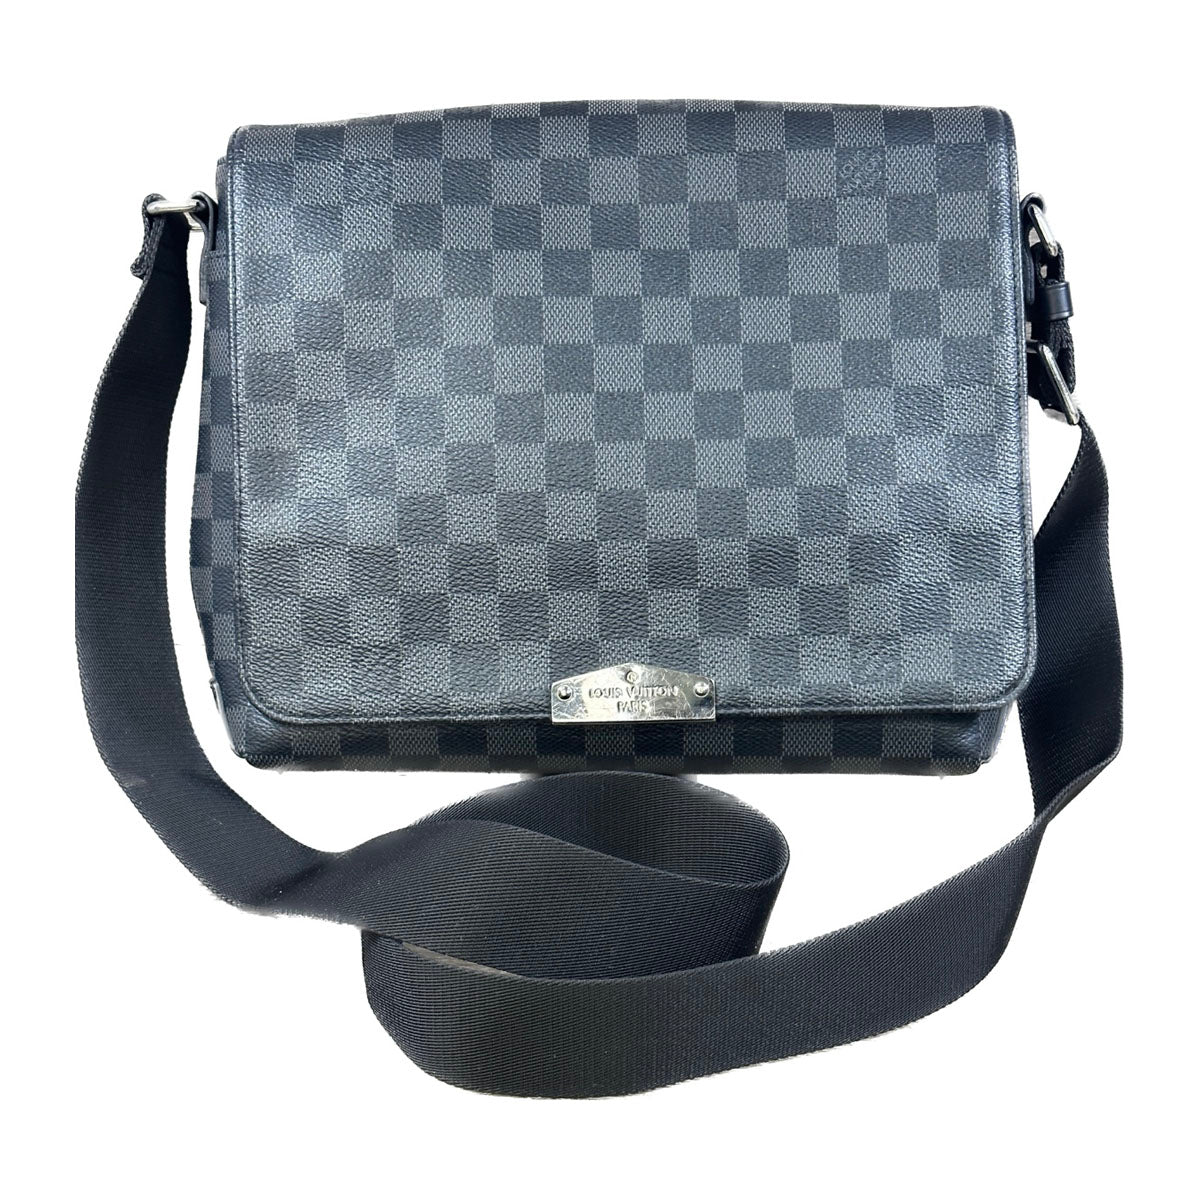 Louis Vuitton Damier Graphite District MM. Made in France. Year